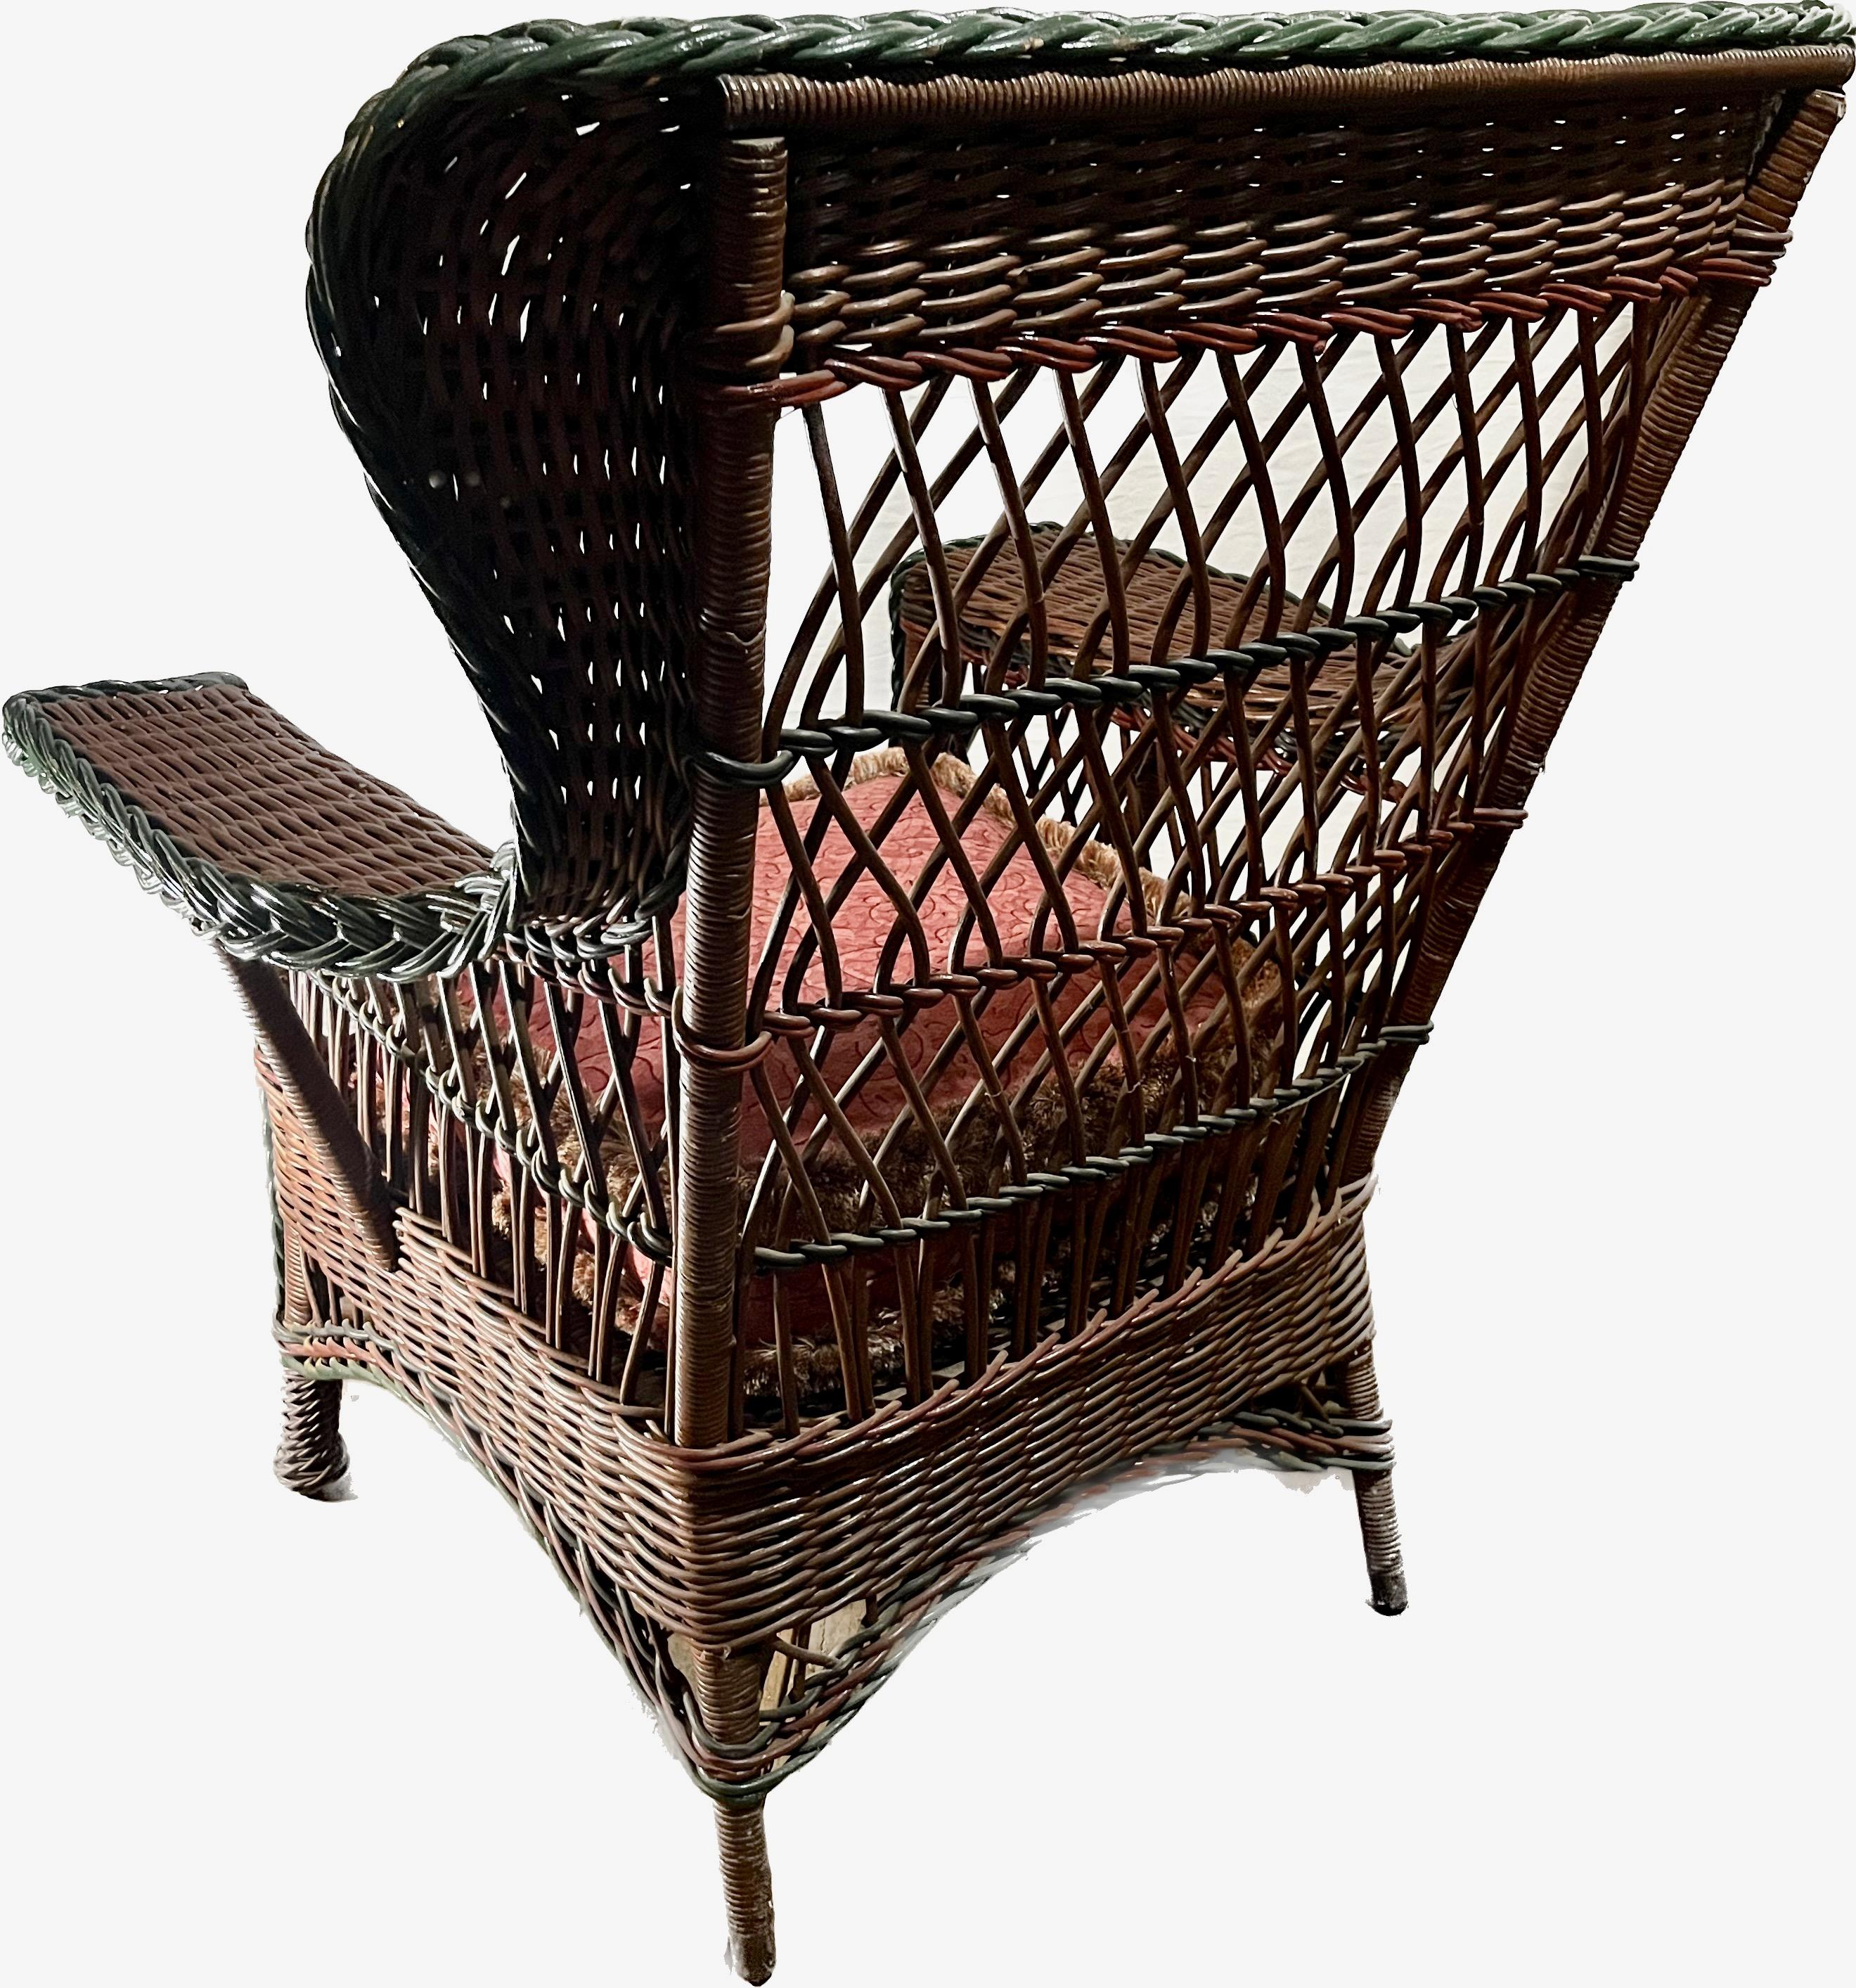 Early 20th Century Antique Bar Harbor Style Wicker Wing Chair in Natural Finish with Green Trim For Sale